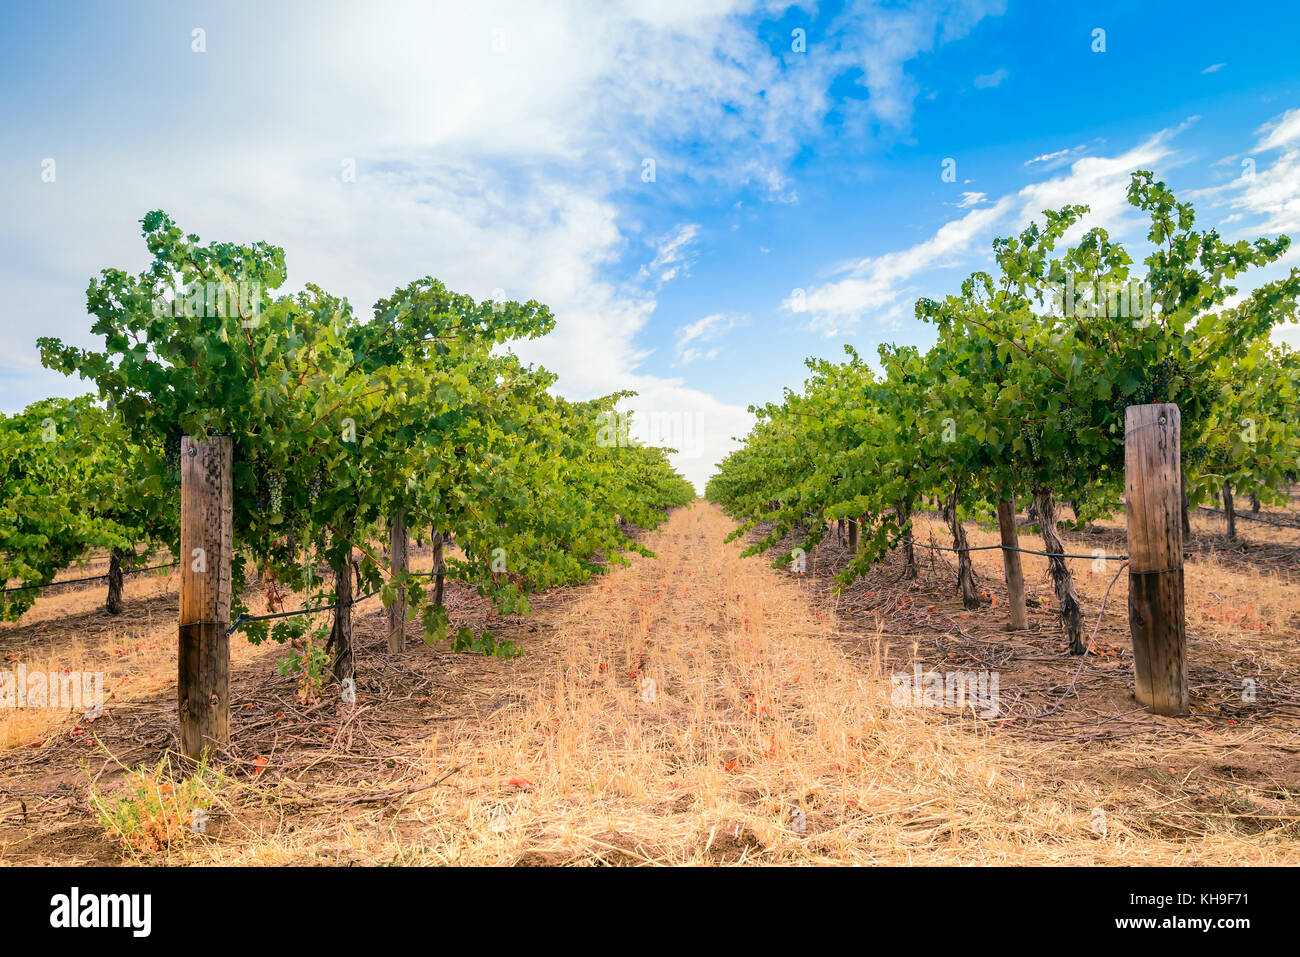 Grape vines with hay field in Barossa valley, South Australia Stock Photo